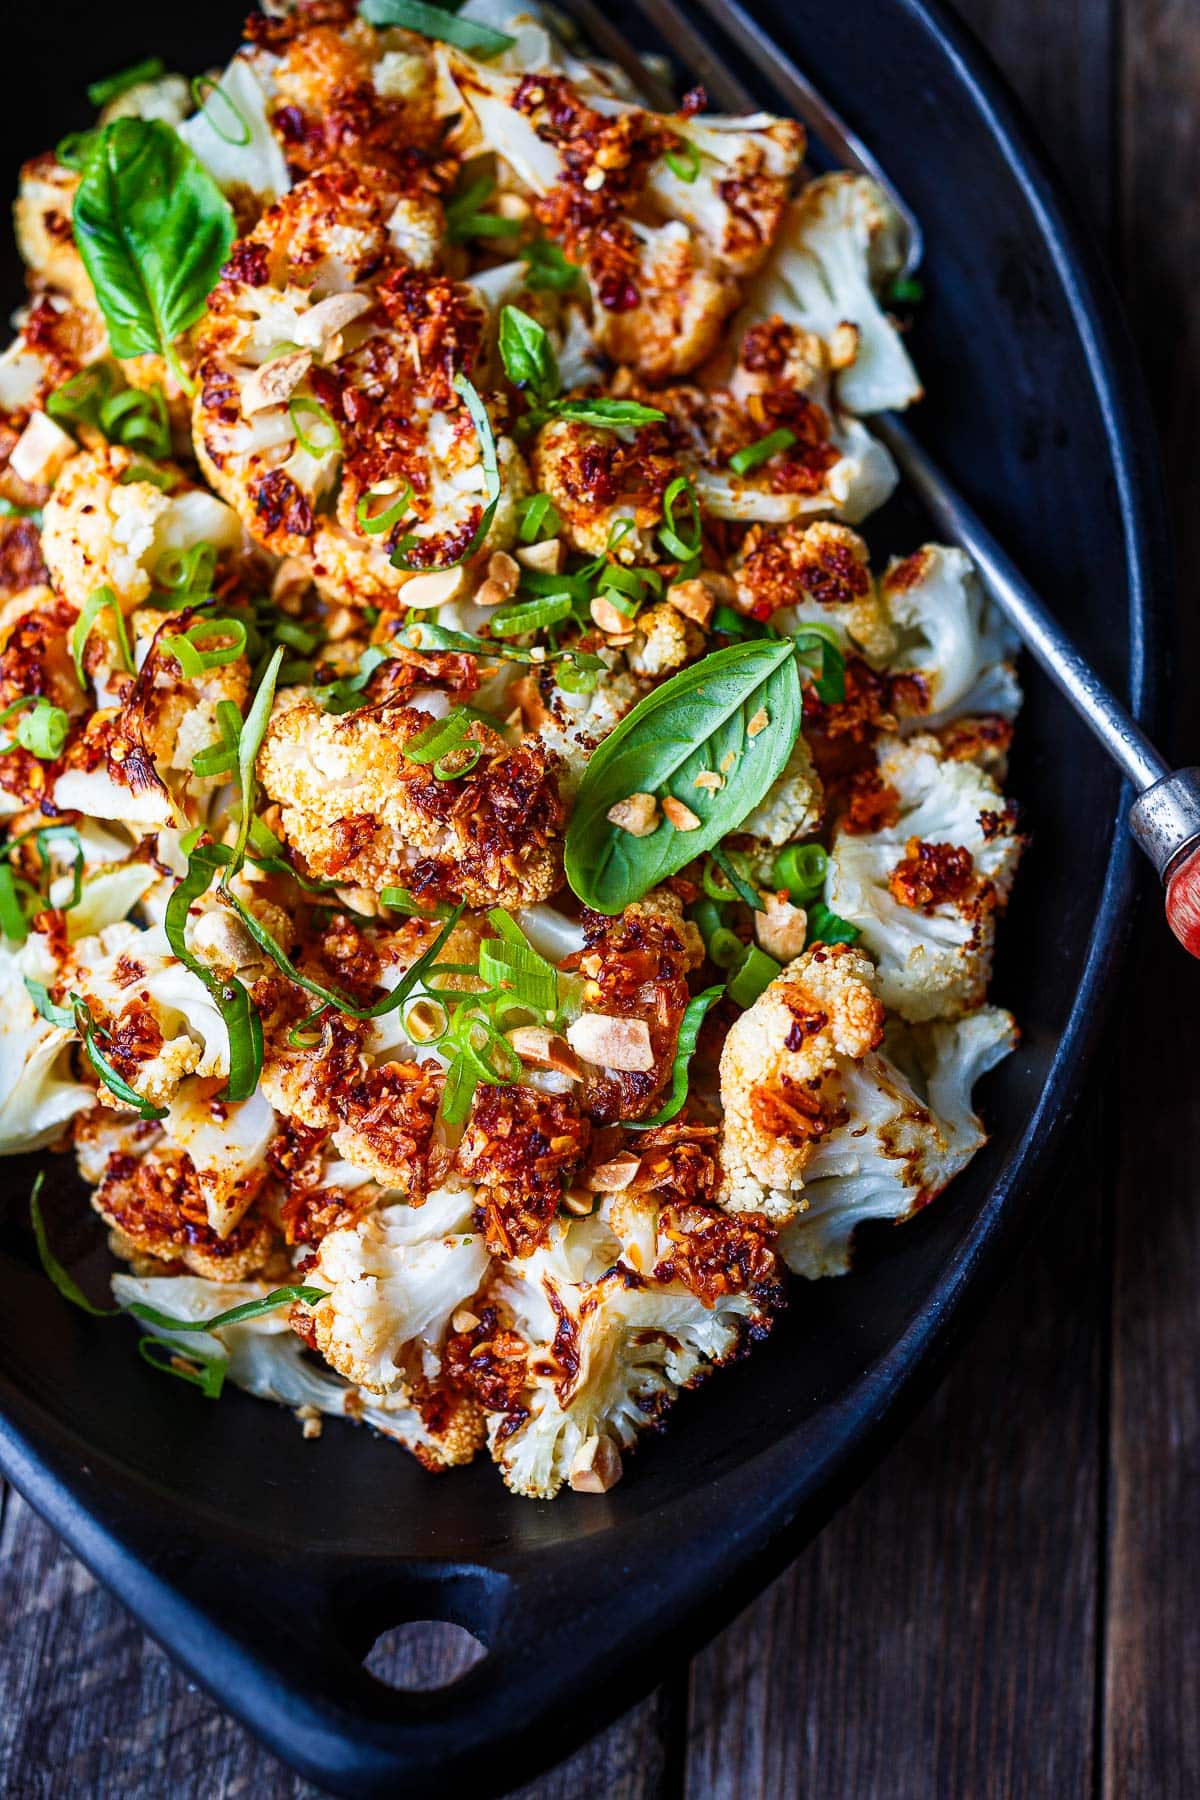 chili crisp cauliflower in a serving bowl garnished with basil, scallions, peanuts.